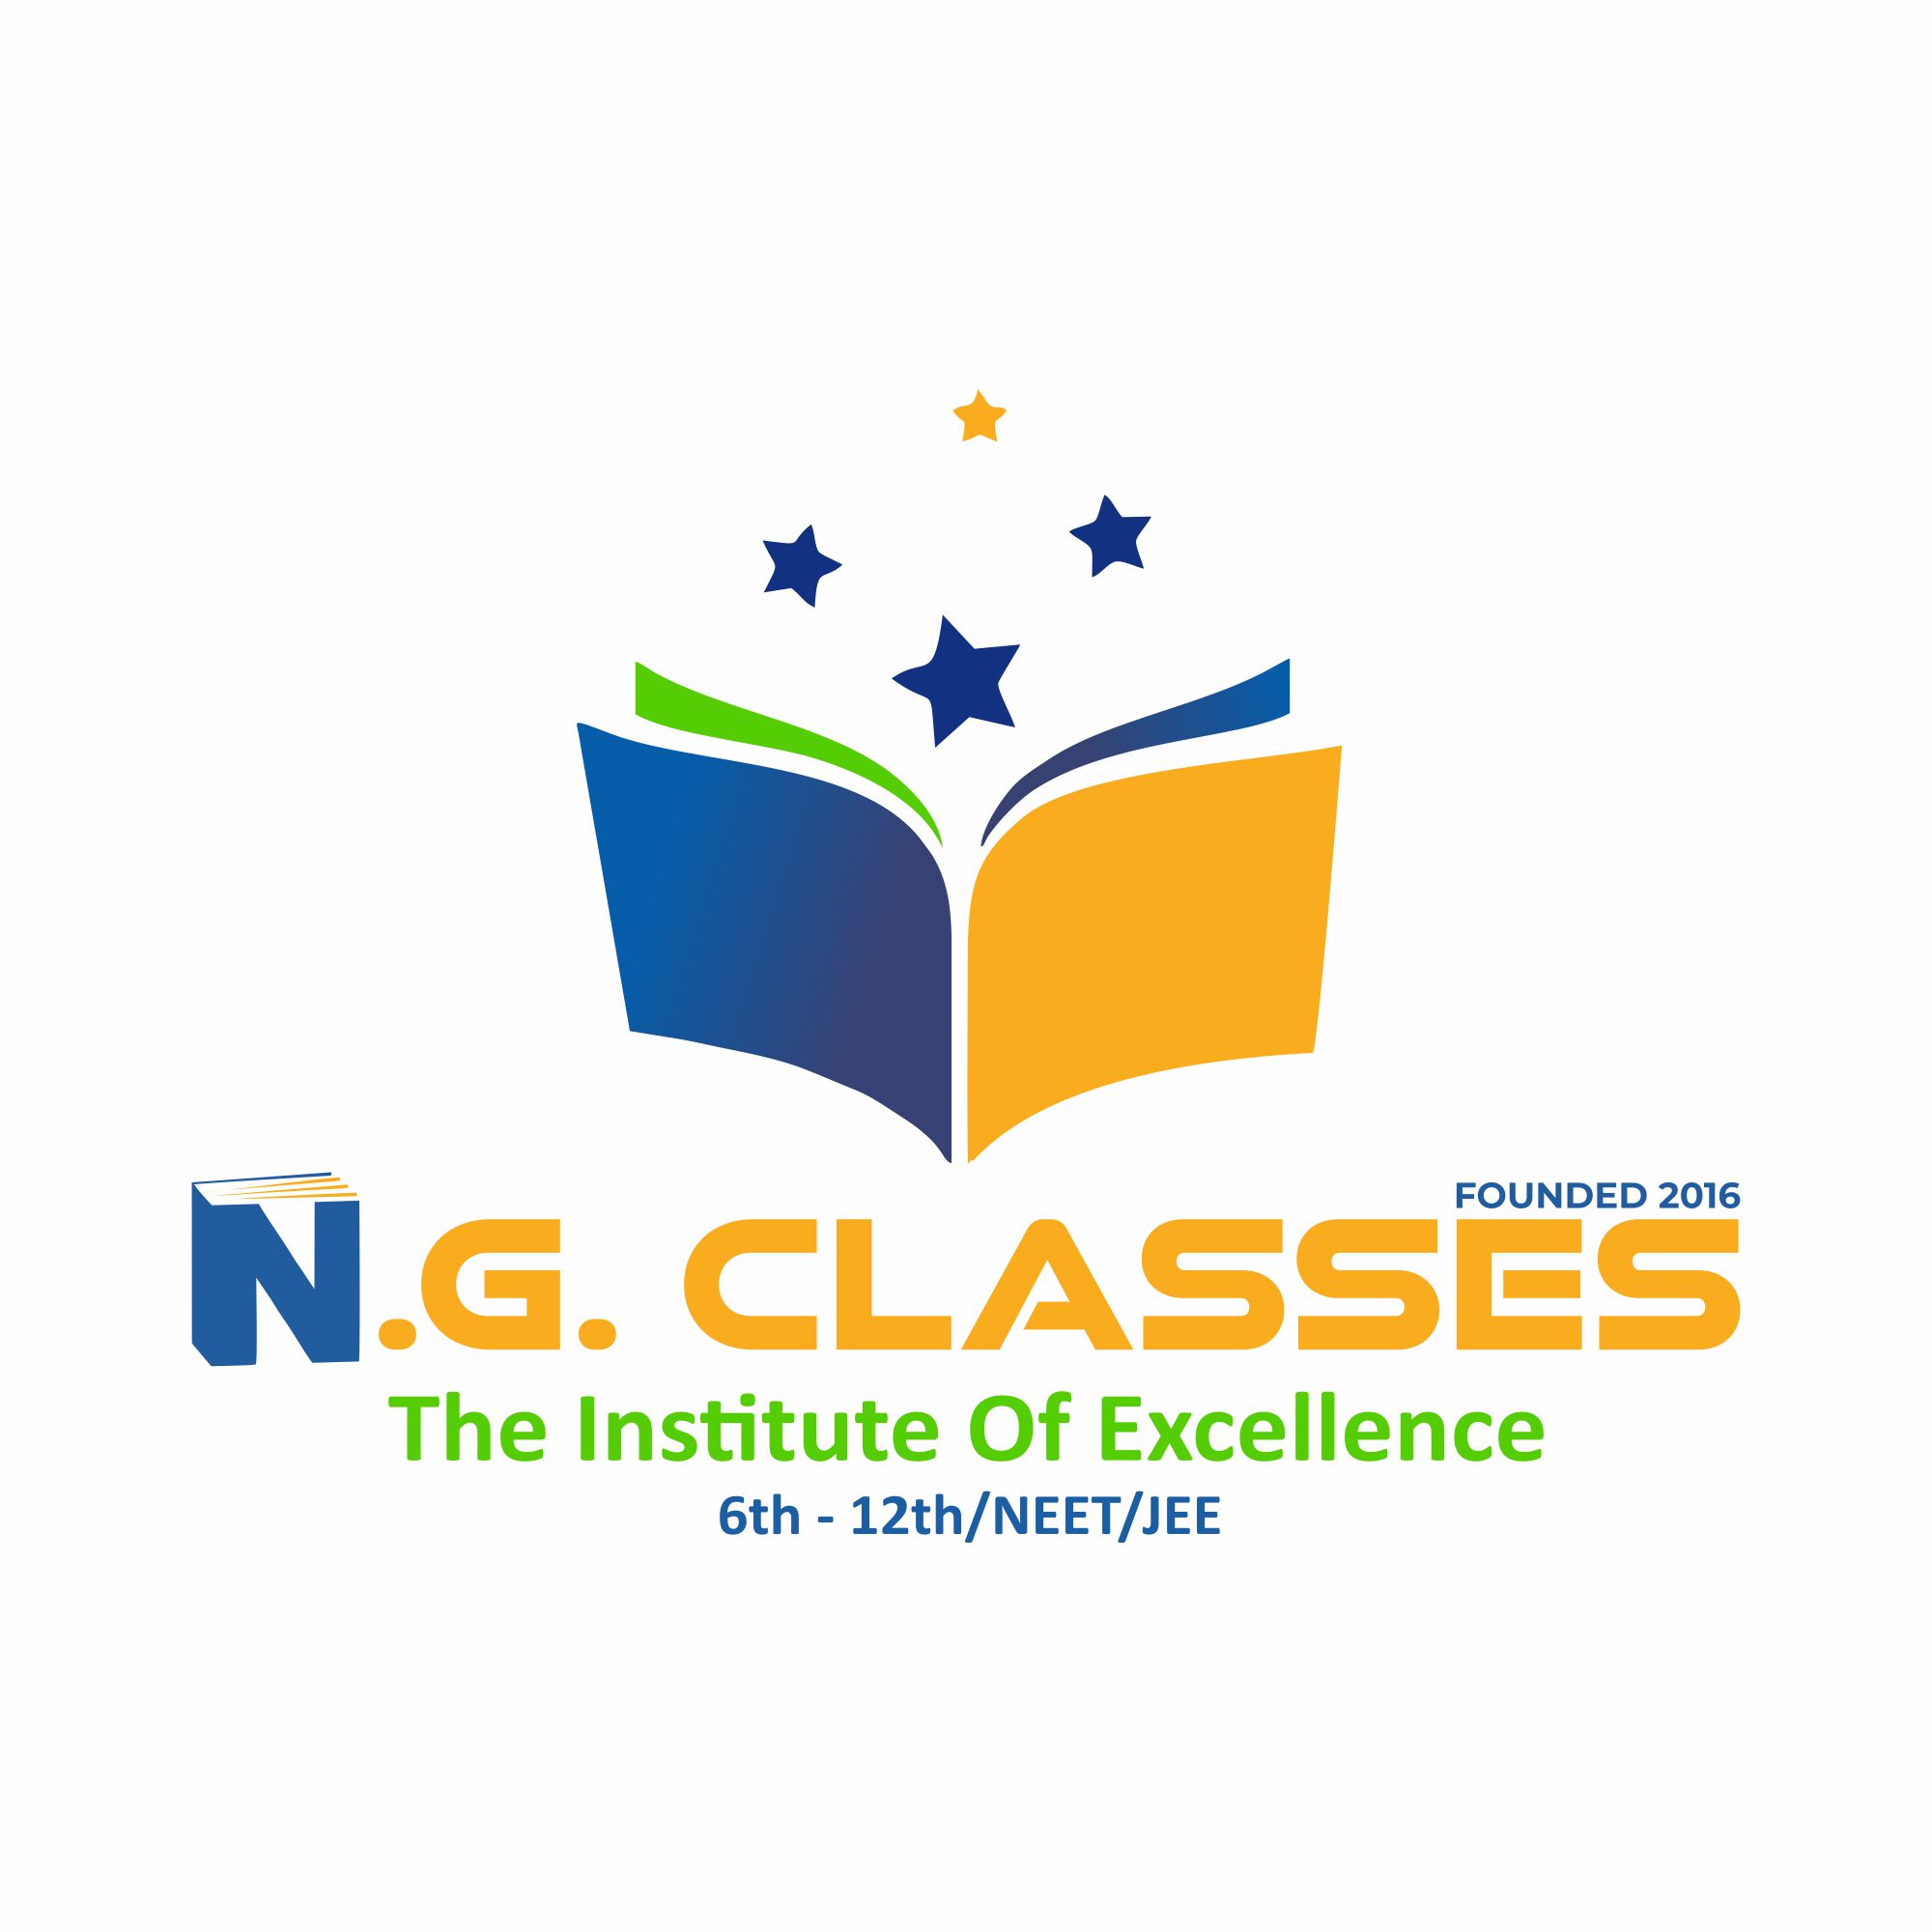 N.G. CLASSES single feature